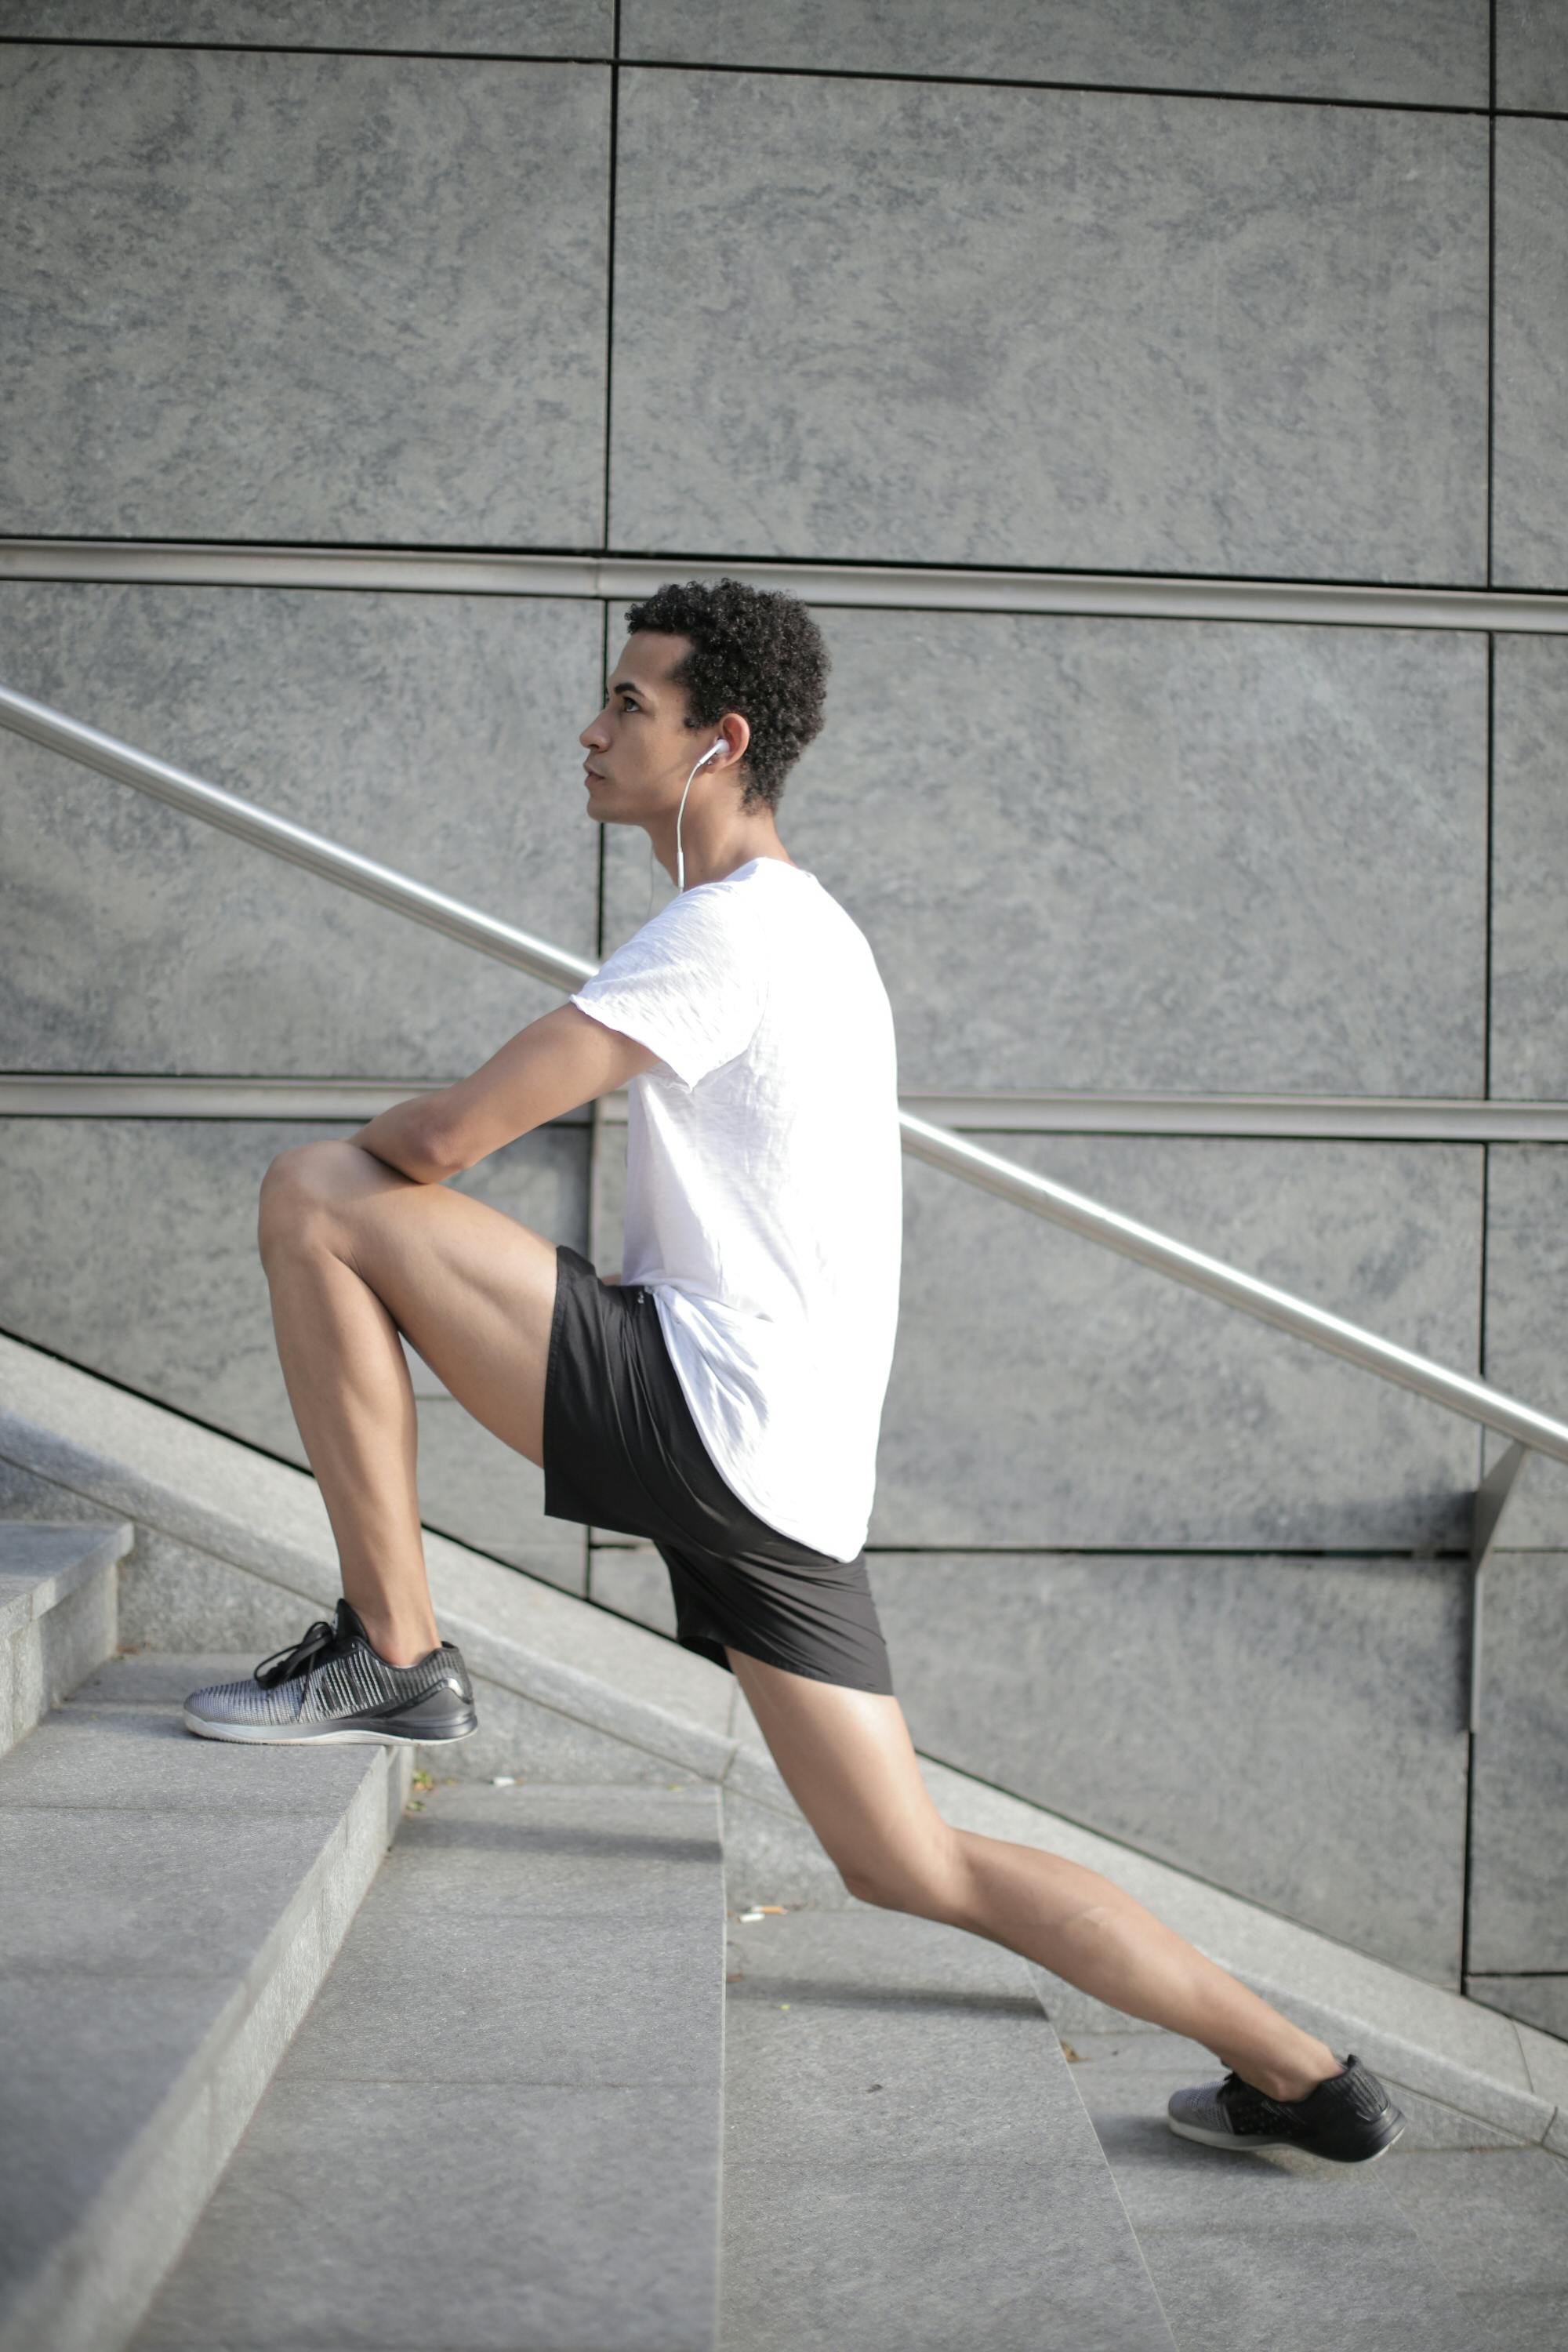 millennial ethnic male athlete stretching legs on stairs in city